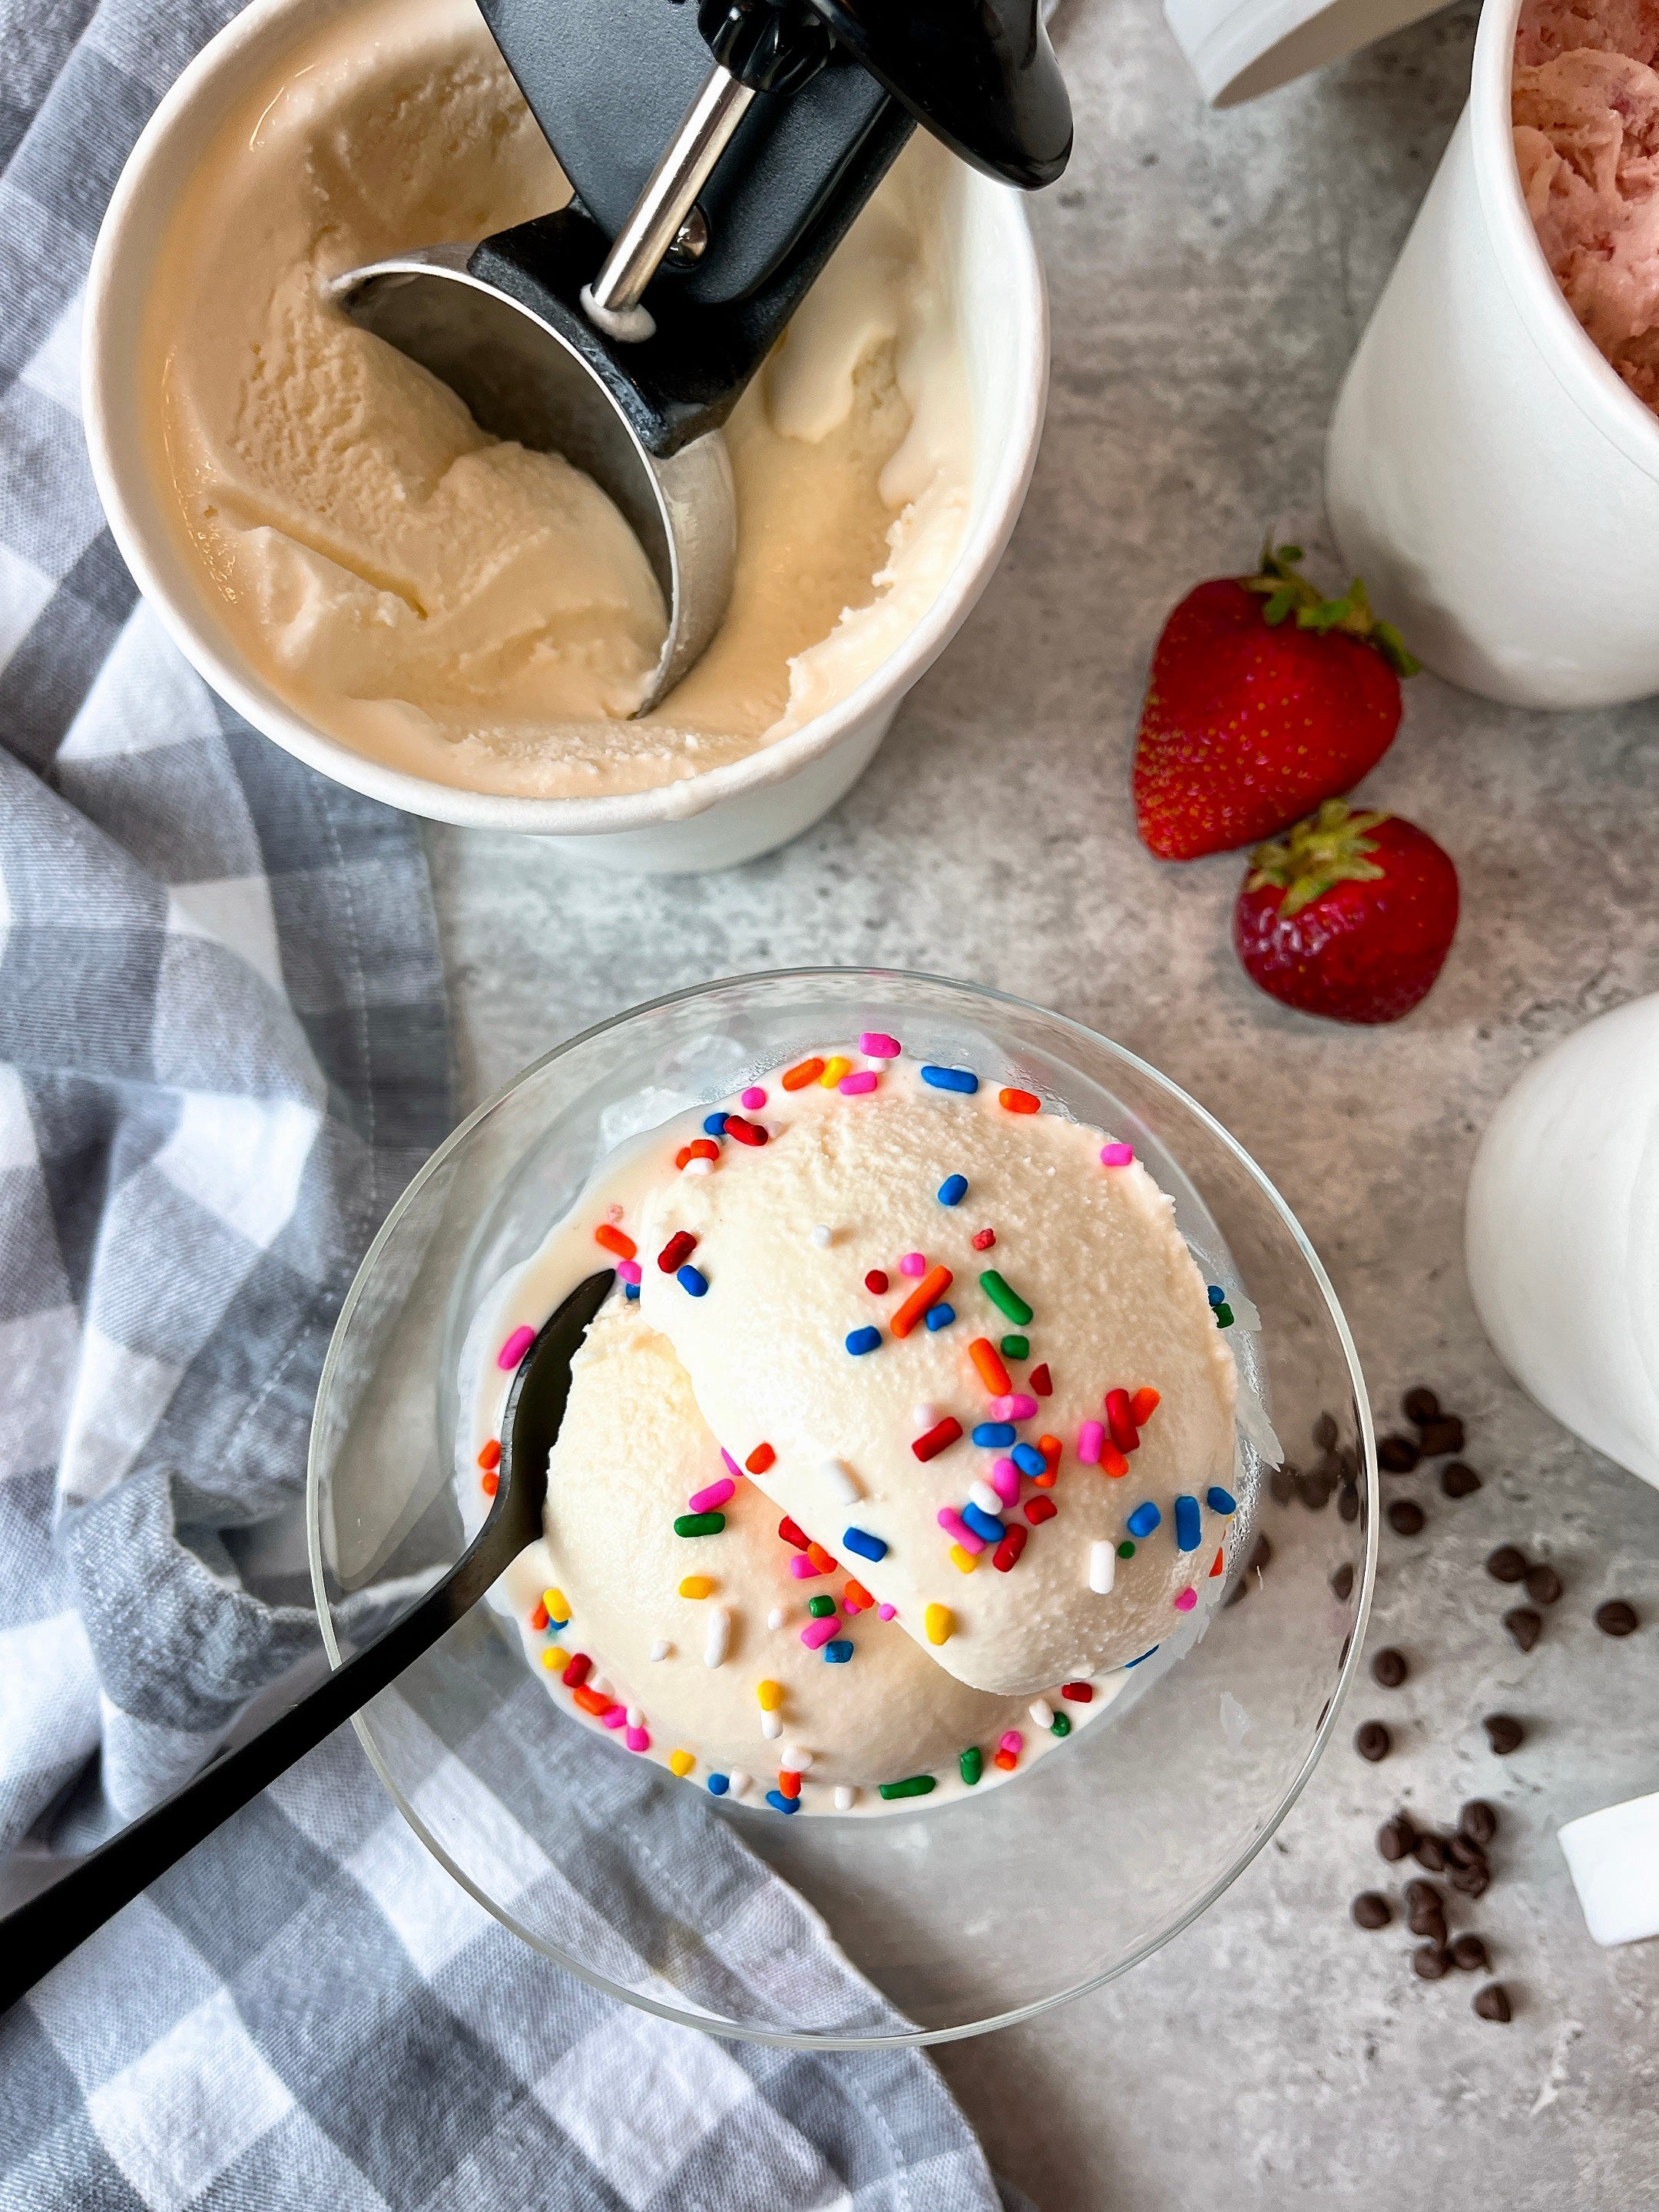 Make delicious homemade ice cream with 3 ingredients, a blender and this recipe